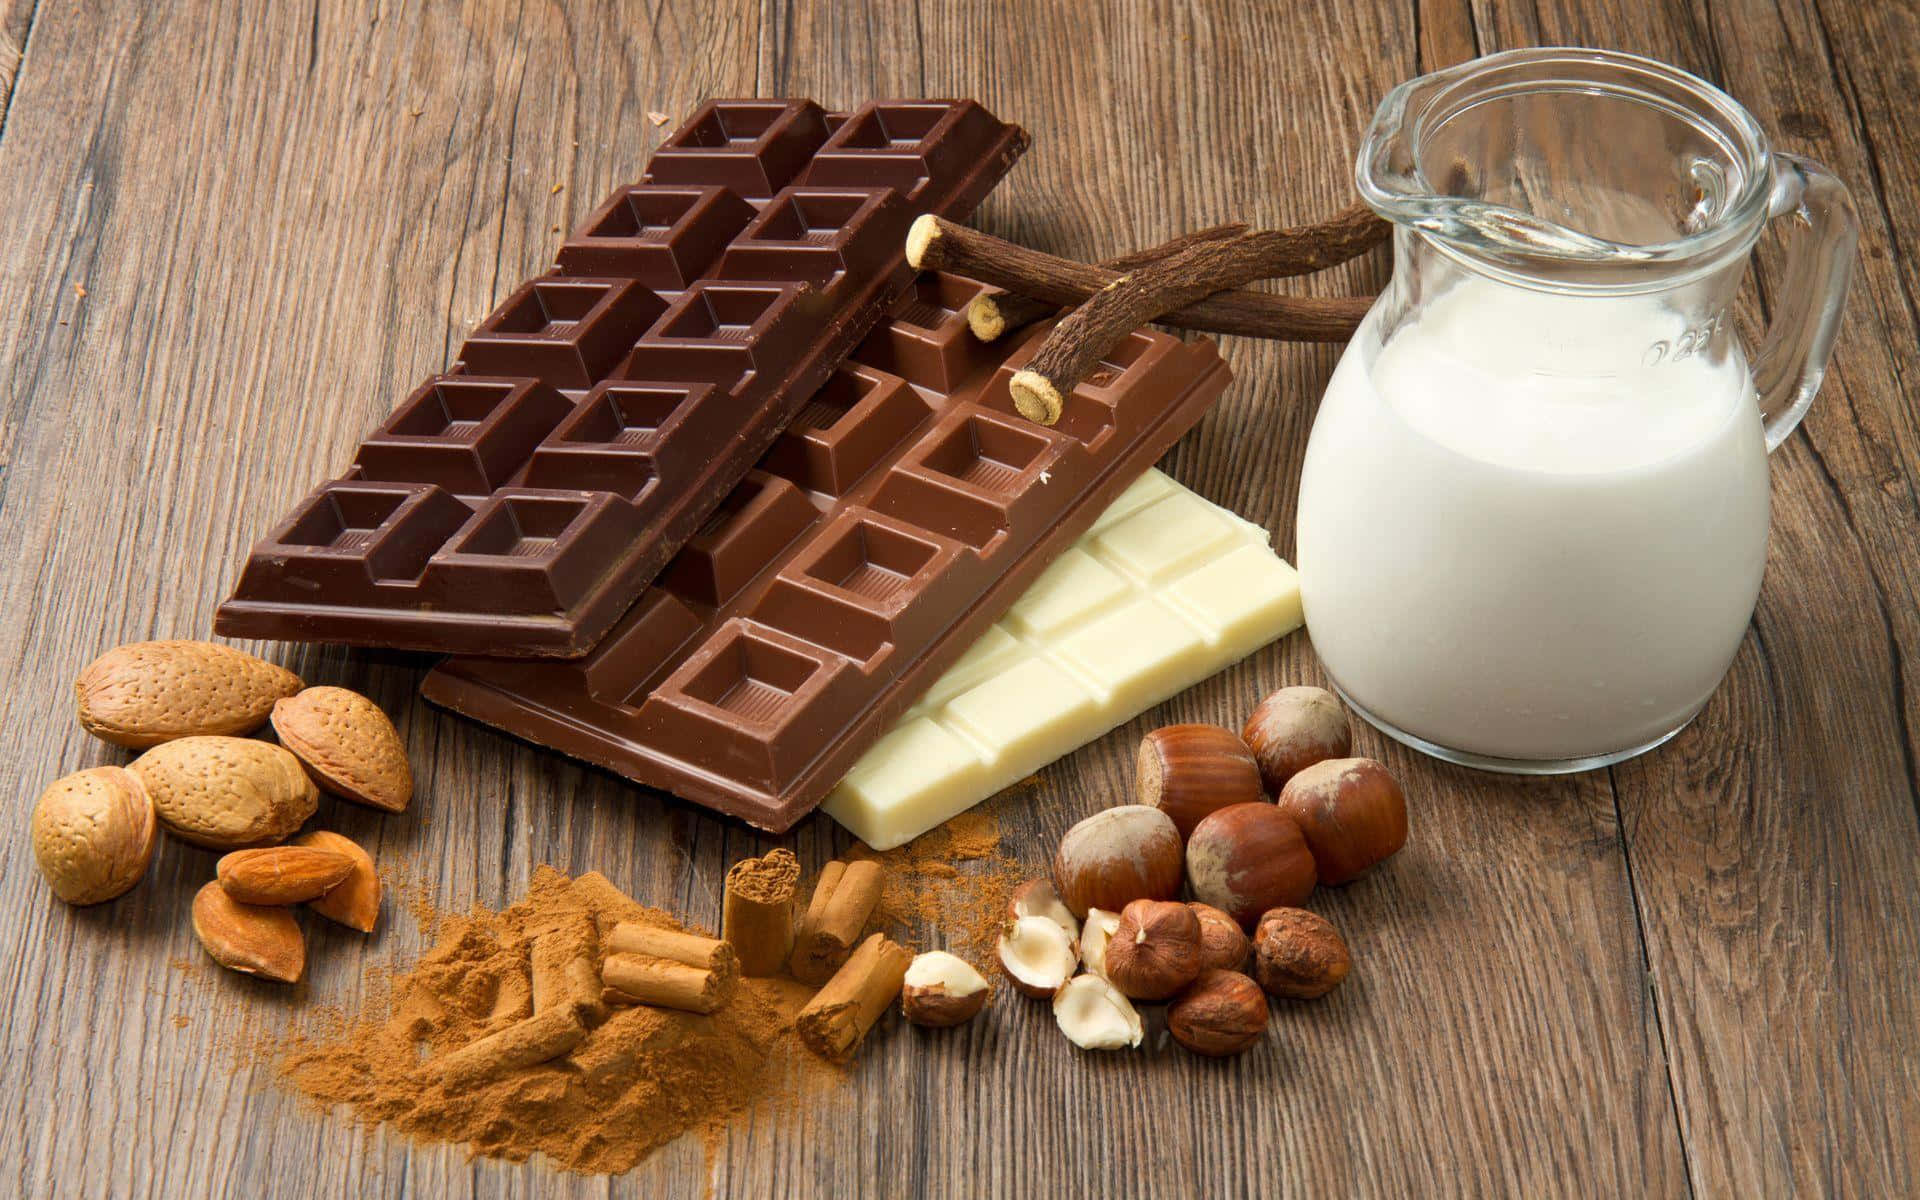 Chocolate, Nuts, Milk And Almonds On A Wooden Table